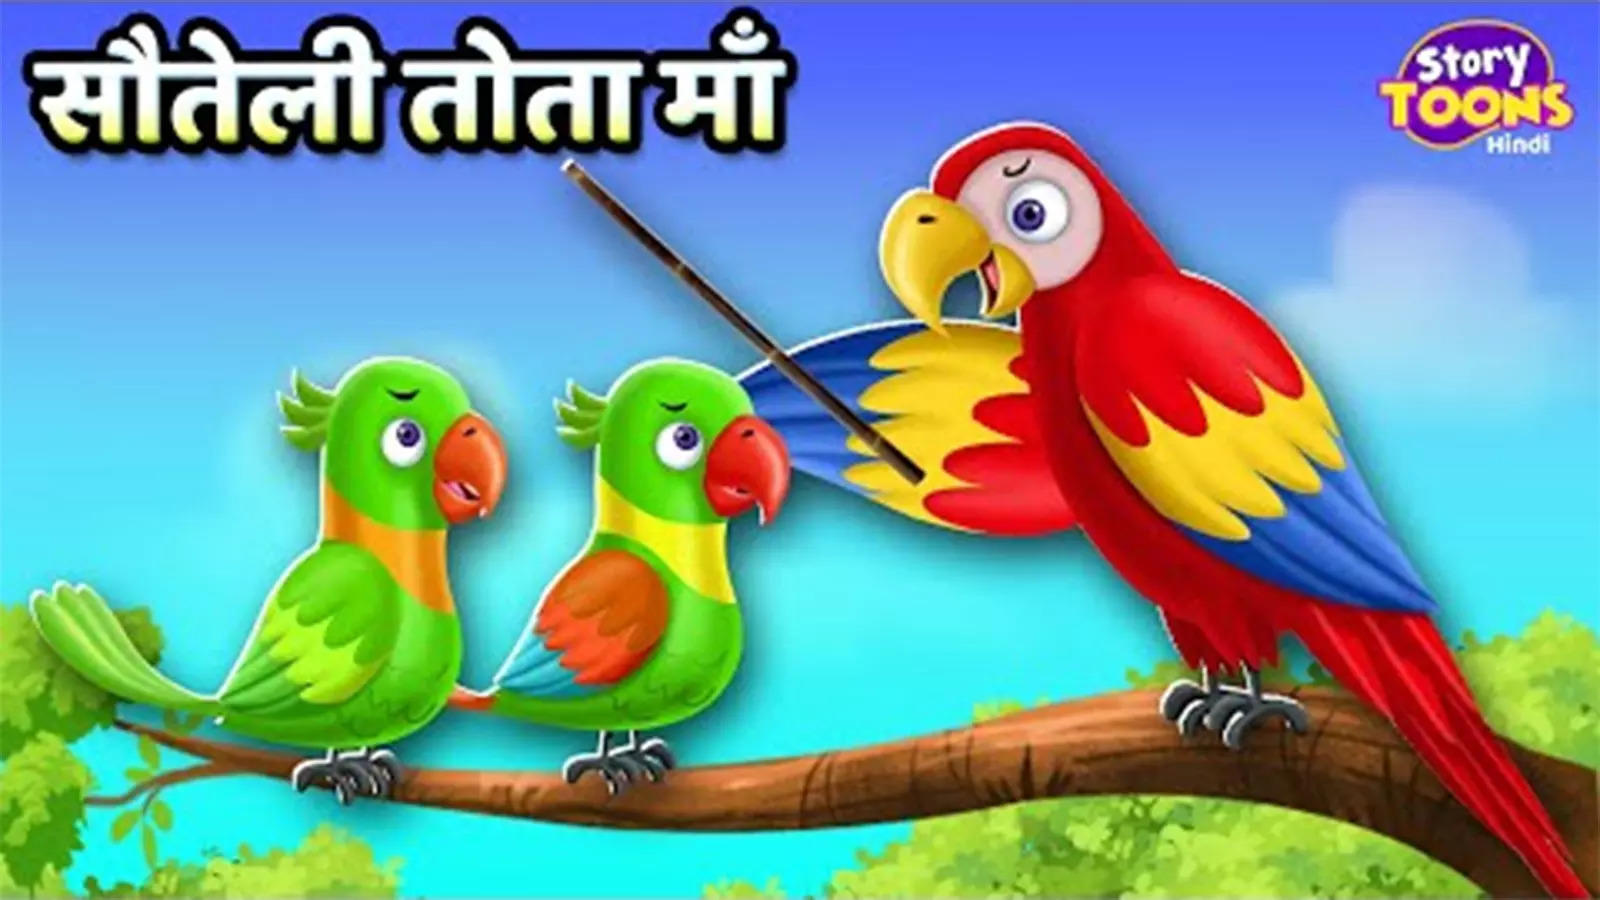 Watch Latest Children Hindi Story 'Step Mother Parrot' For Kids - Check Out  Kids's Nursery Rhymes And Baby Songs In Hindi | Entertainment - Times of  India Videos